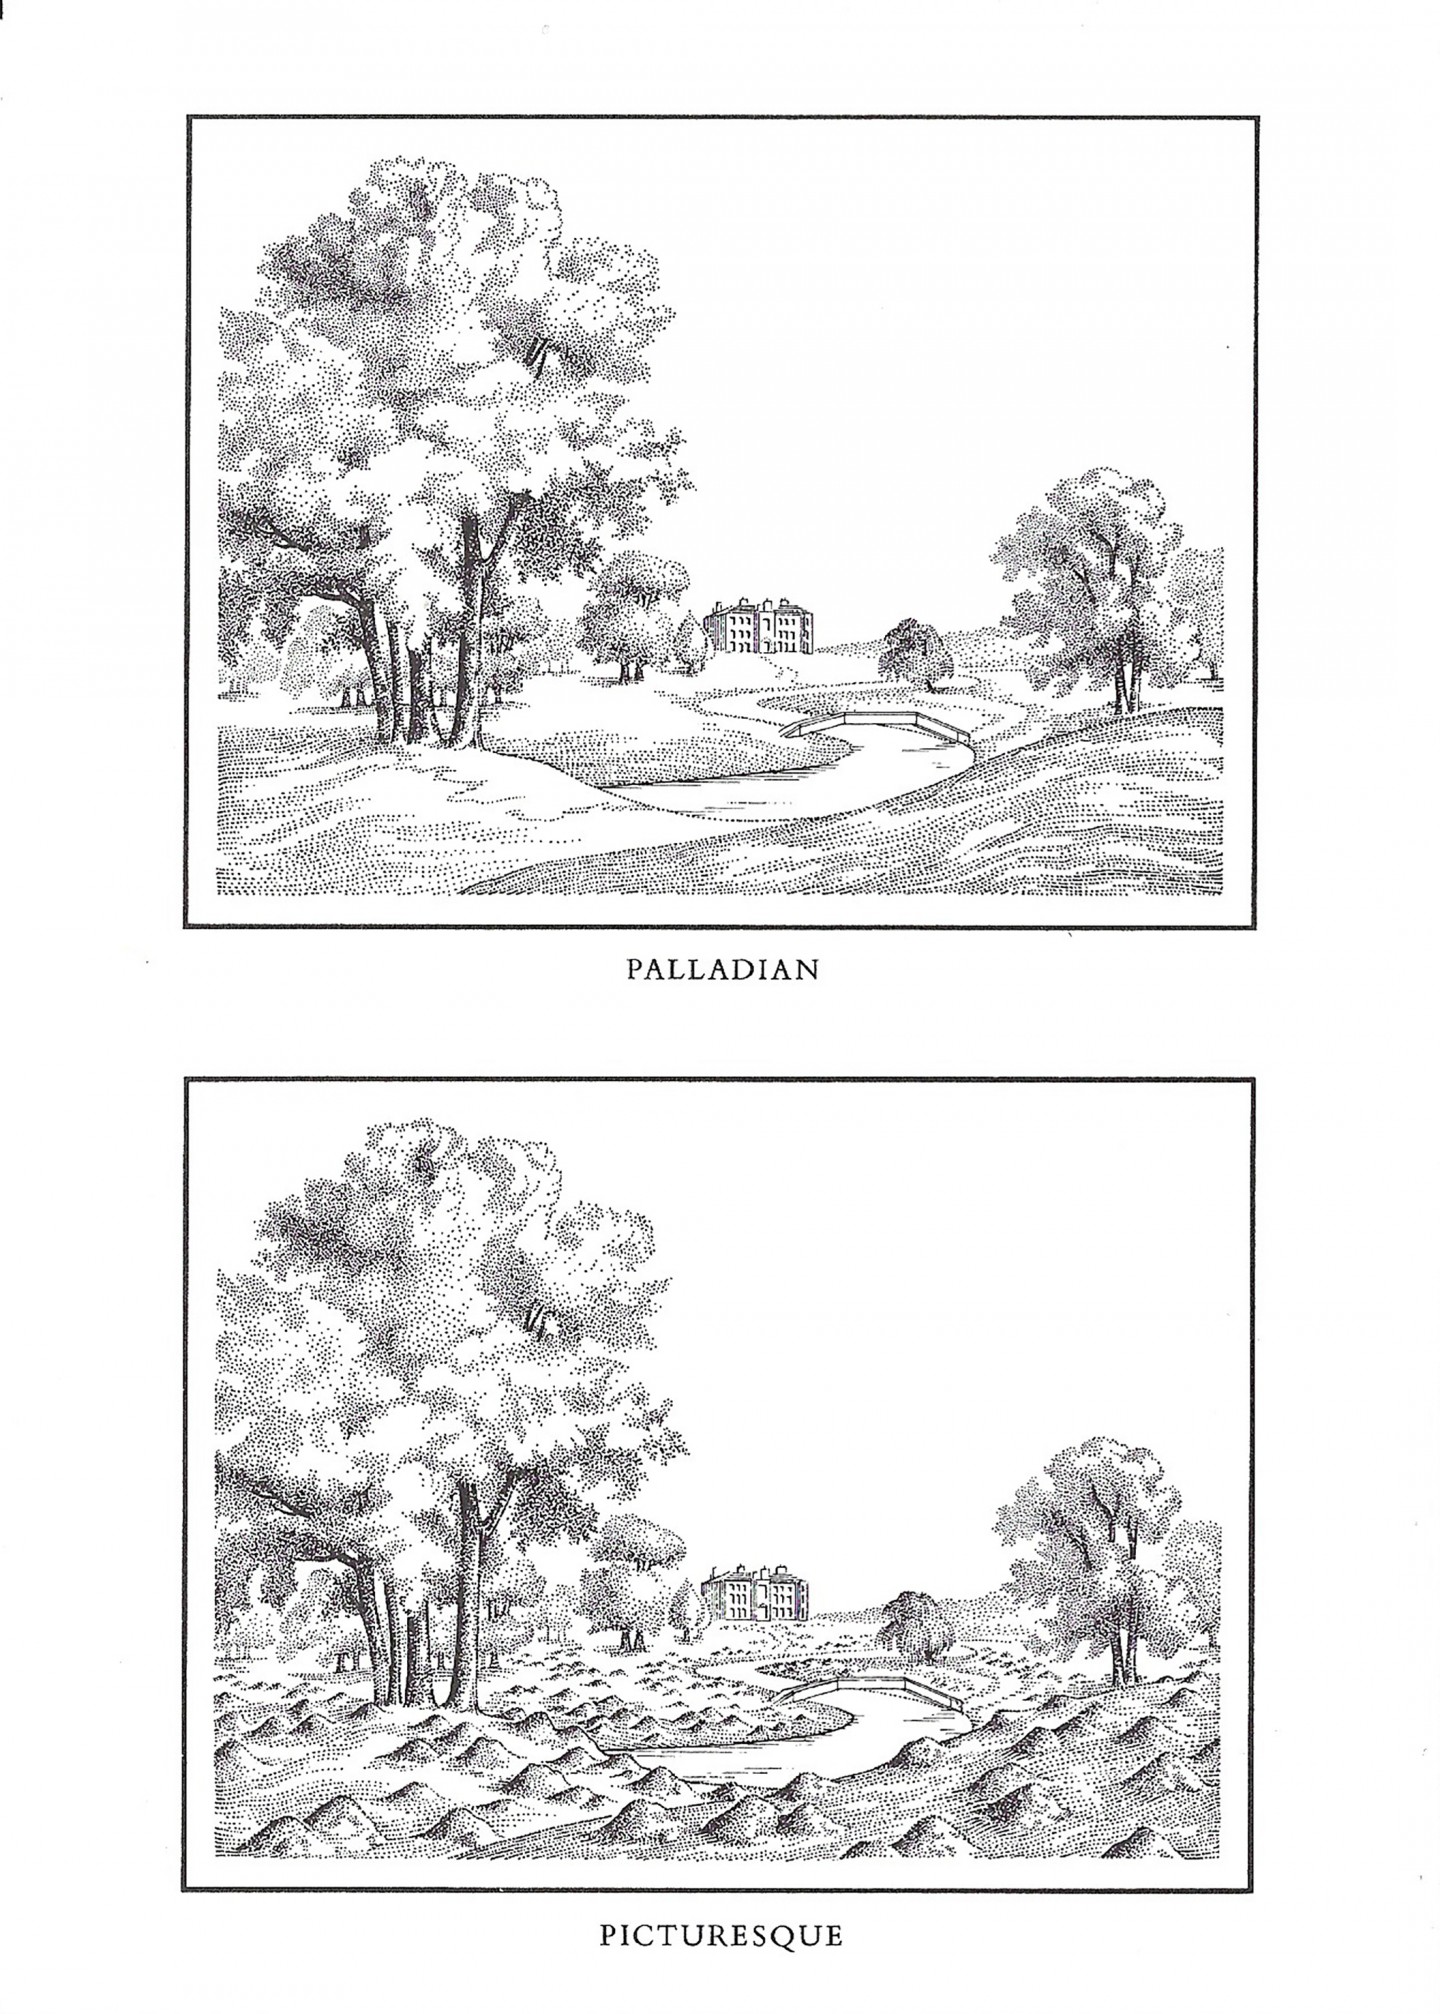 Palladian Picturesque, After Thomas Hearne